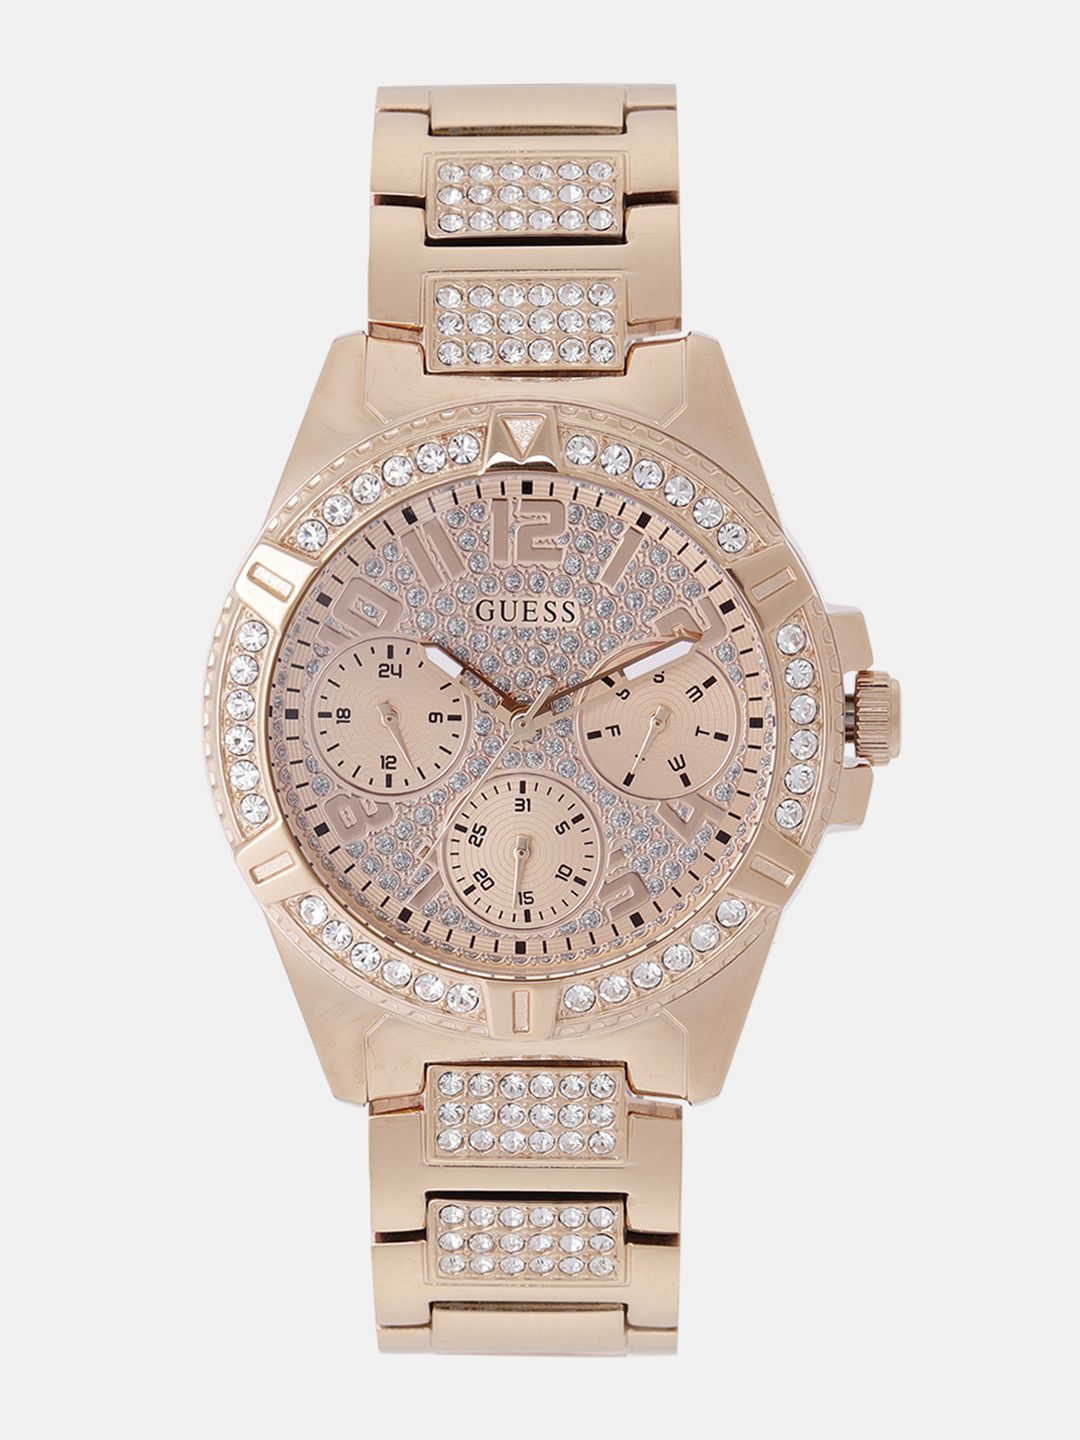 GUESS Women Rose Gold Analogue Watch W1156L3 Price in India